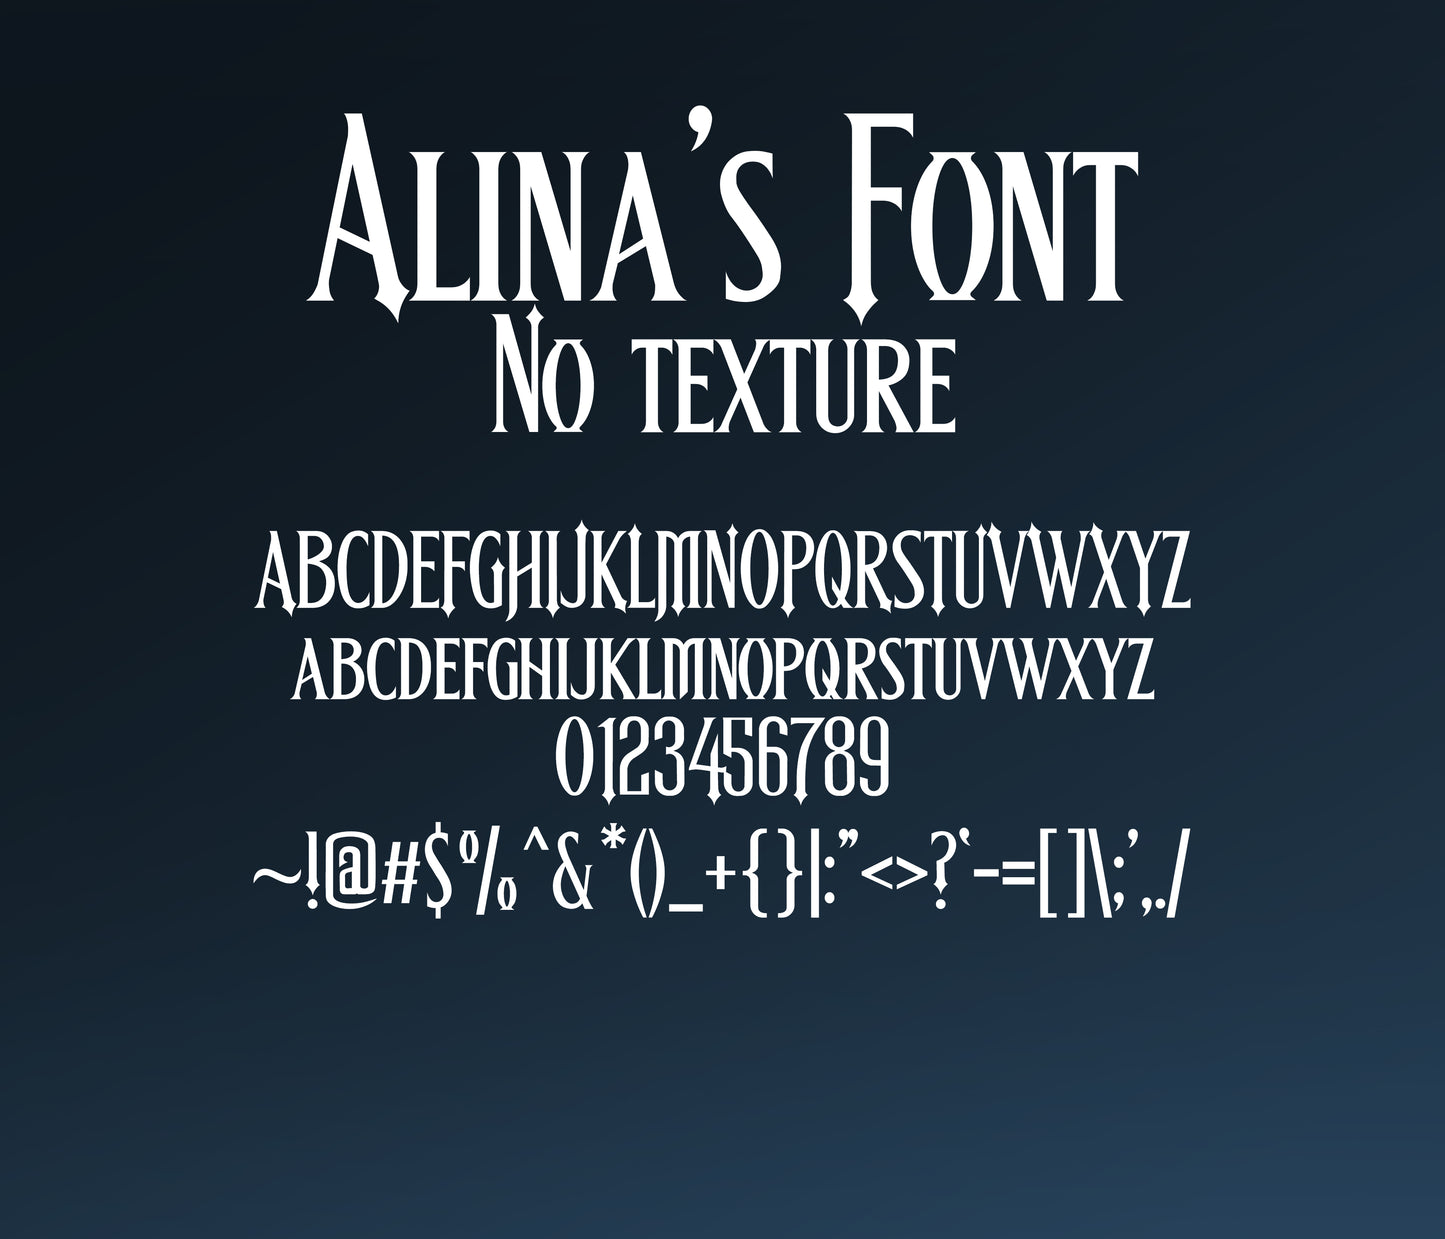 Haunted Mansion Textured Font